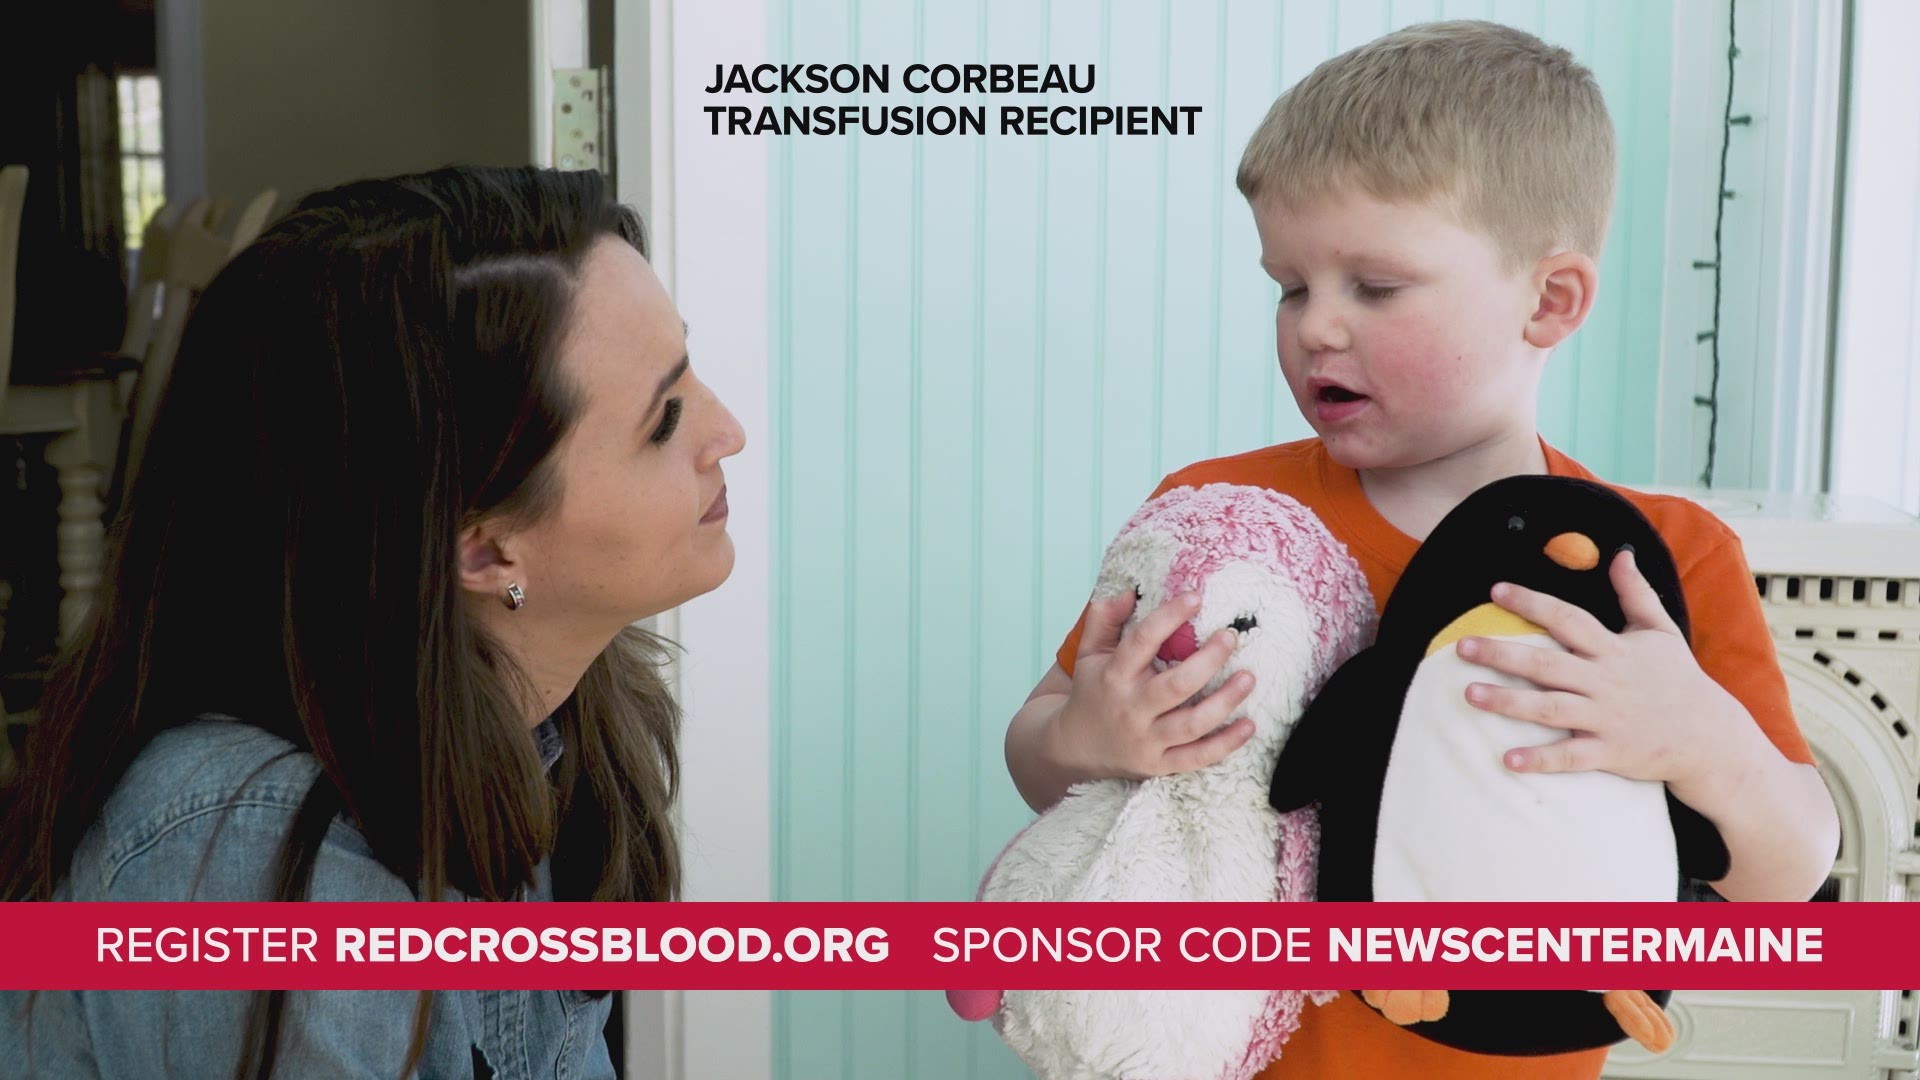 Jackson Corbeau is a transfusion patient who is alive today because of those that donated blood.